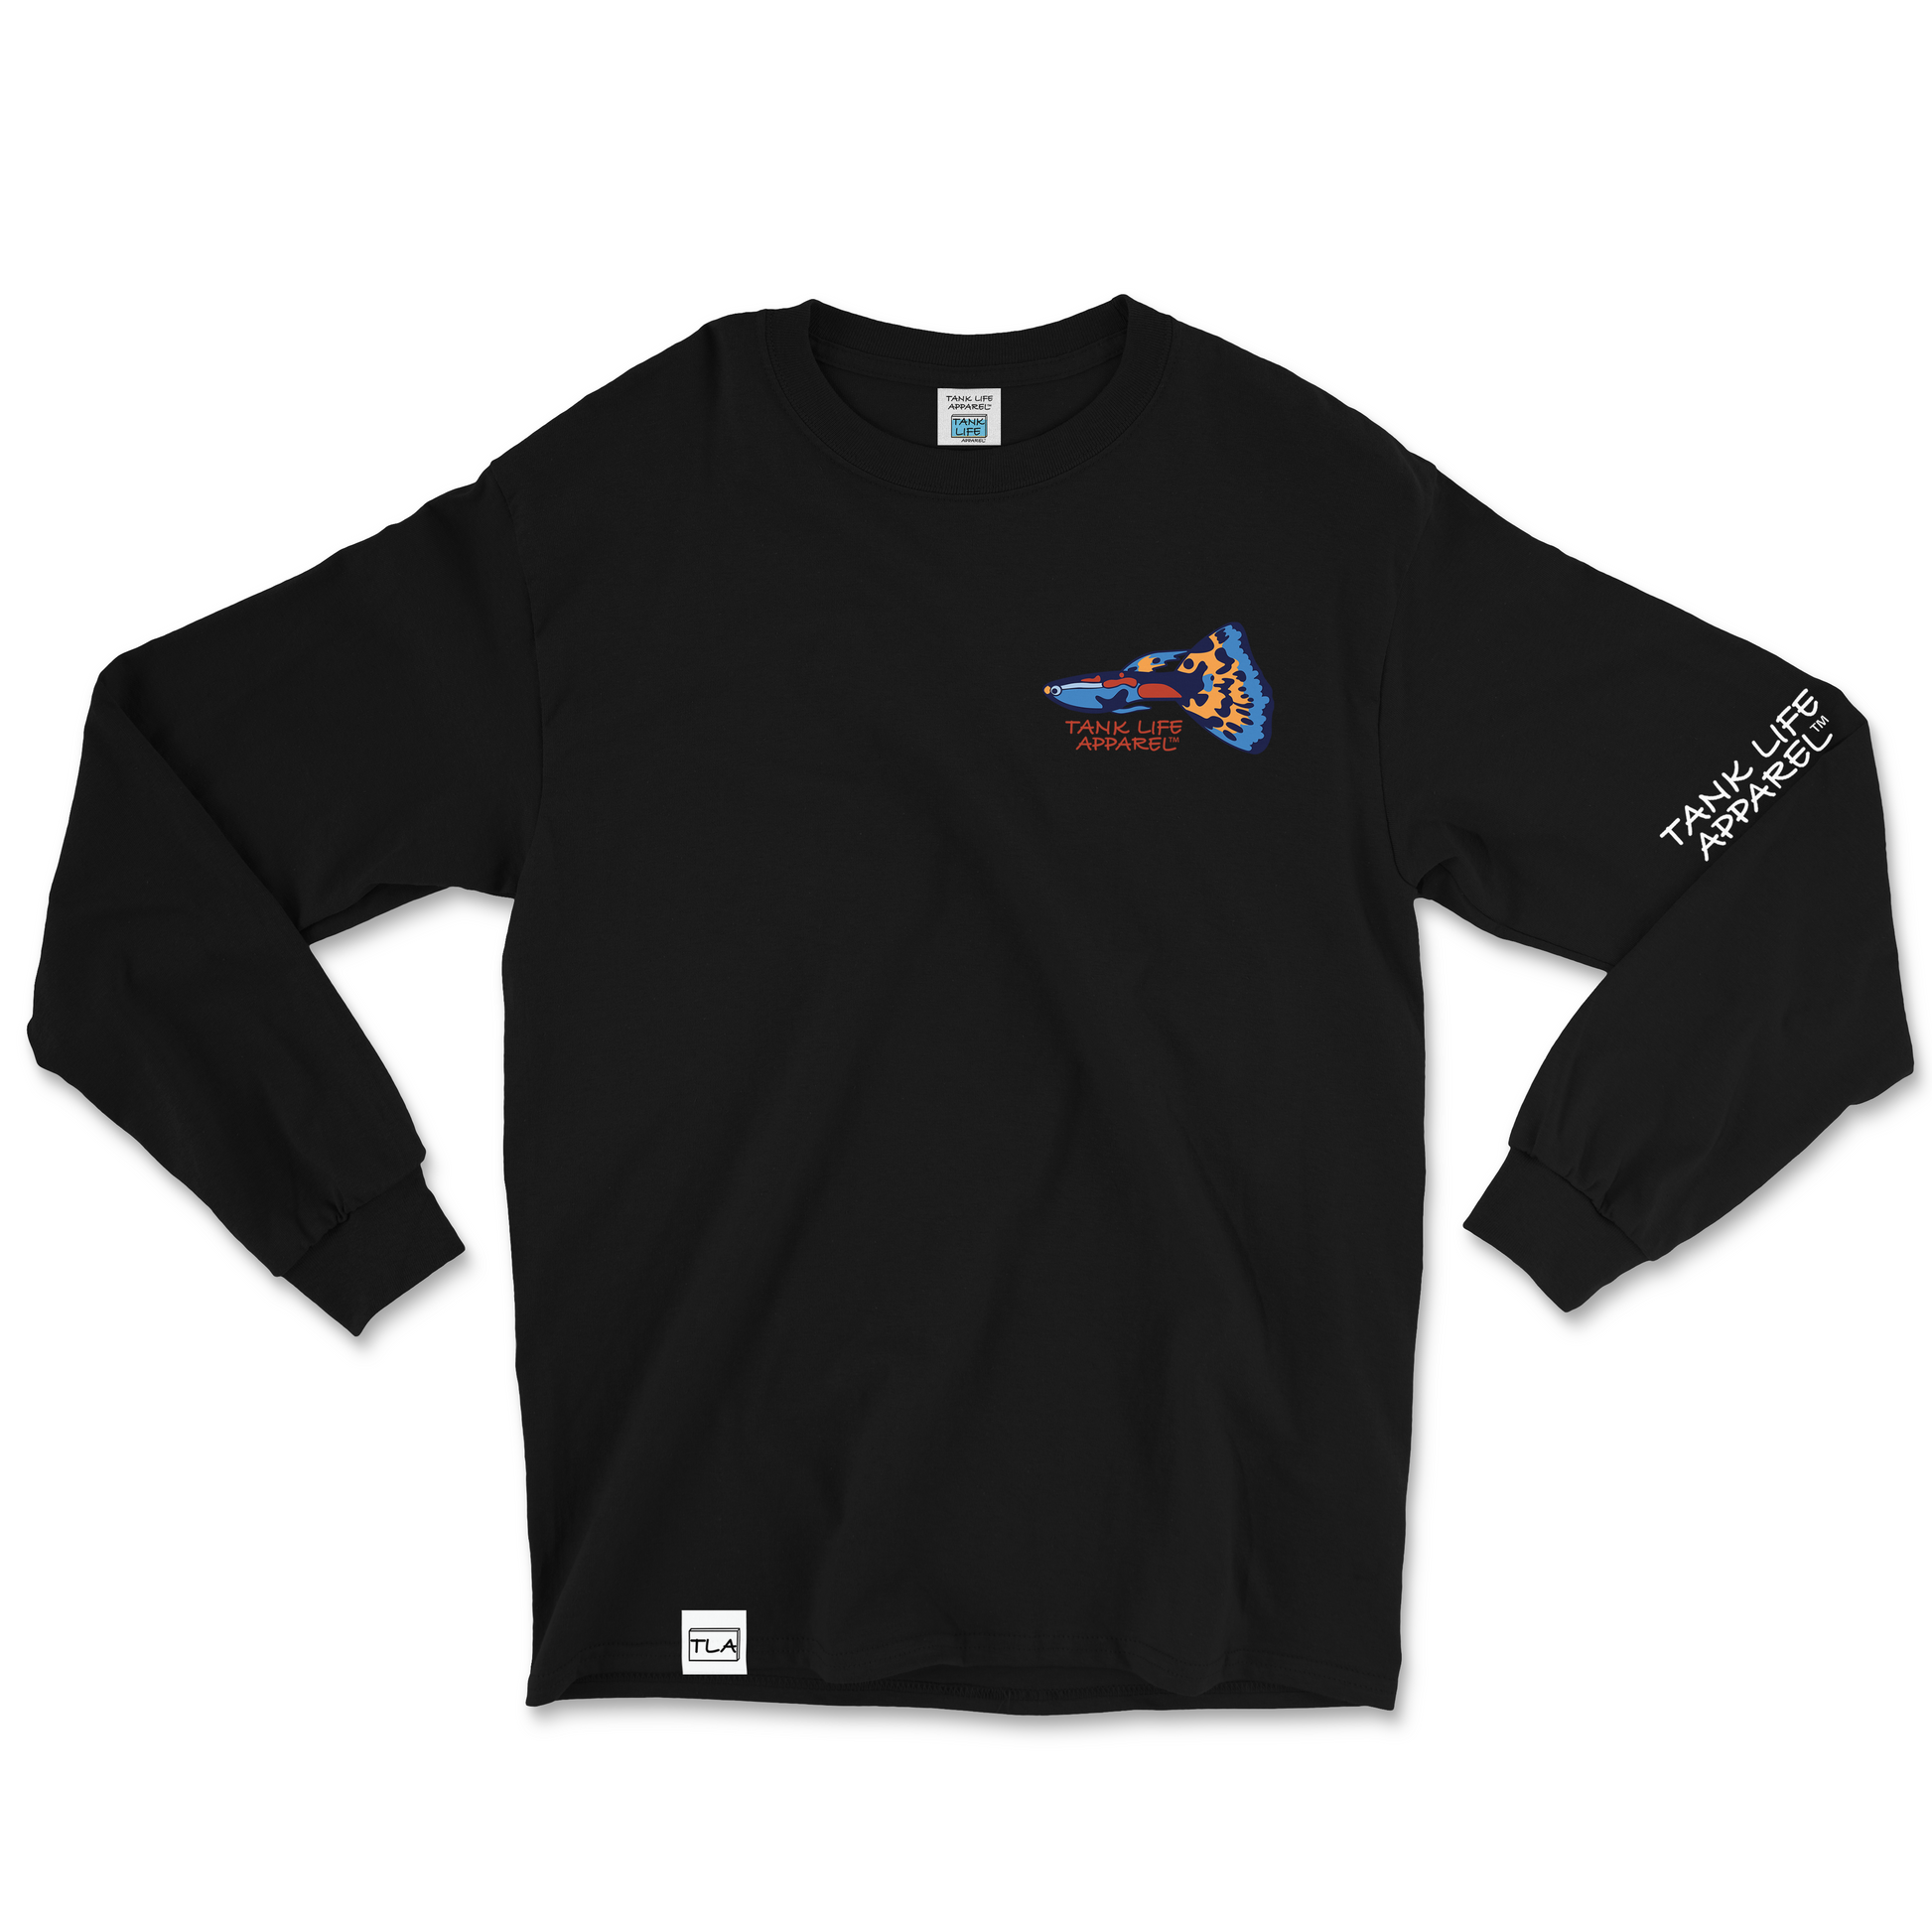 The Tank Life Apparel guppy design on a super comfortable long sleeve shirt. Colorful little fish.